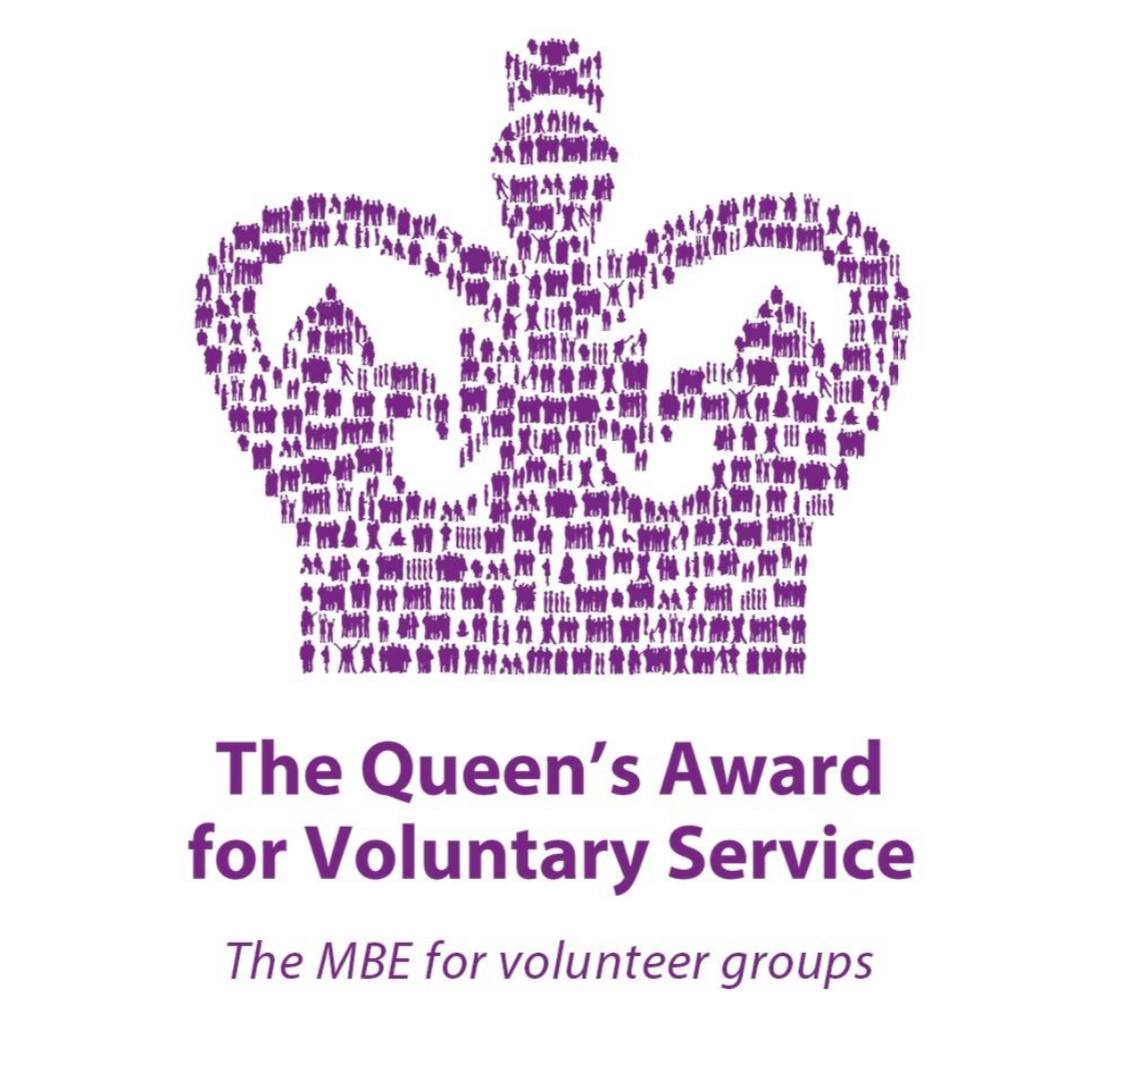 Absolutely thrilled to announce that @palaceponies has been awarded the @QueensAwardVS today as part of the Jubilee celebrations - equivalent to an MBE is pretty cool! As a volunteer led organisation, its recognition like this that makes us proud 🐴♥️ #QAVS2022 #ponypower